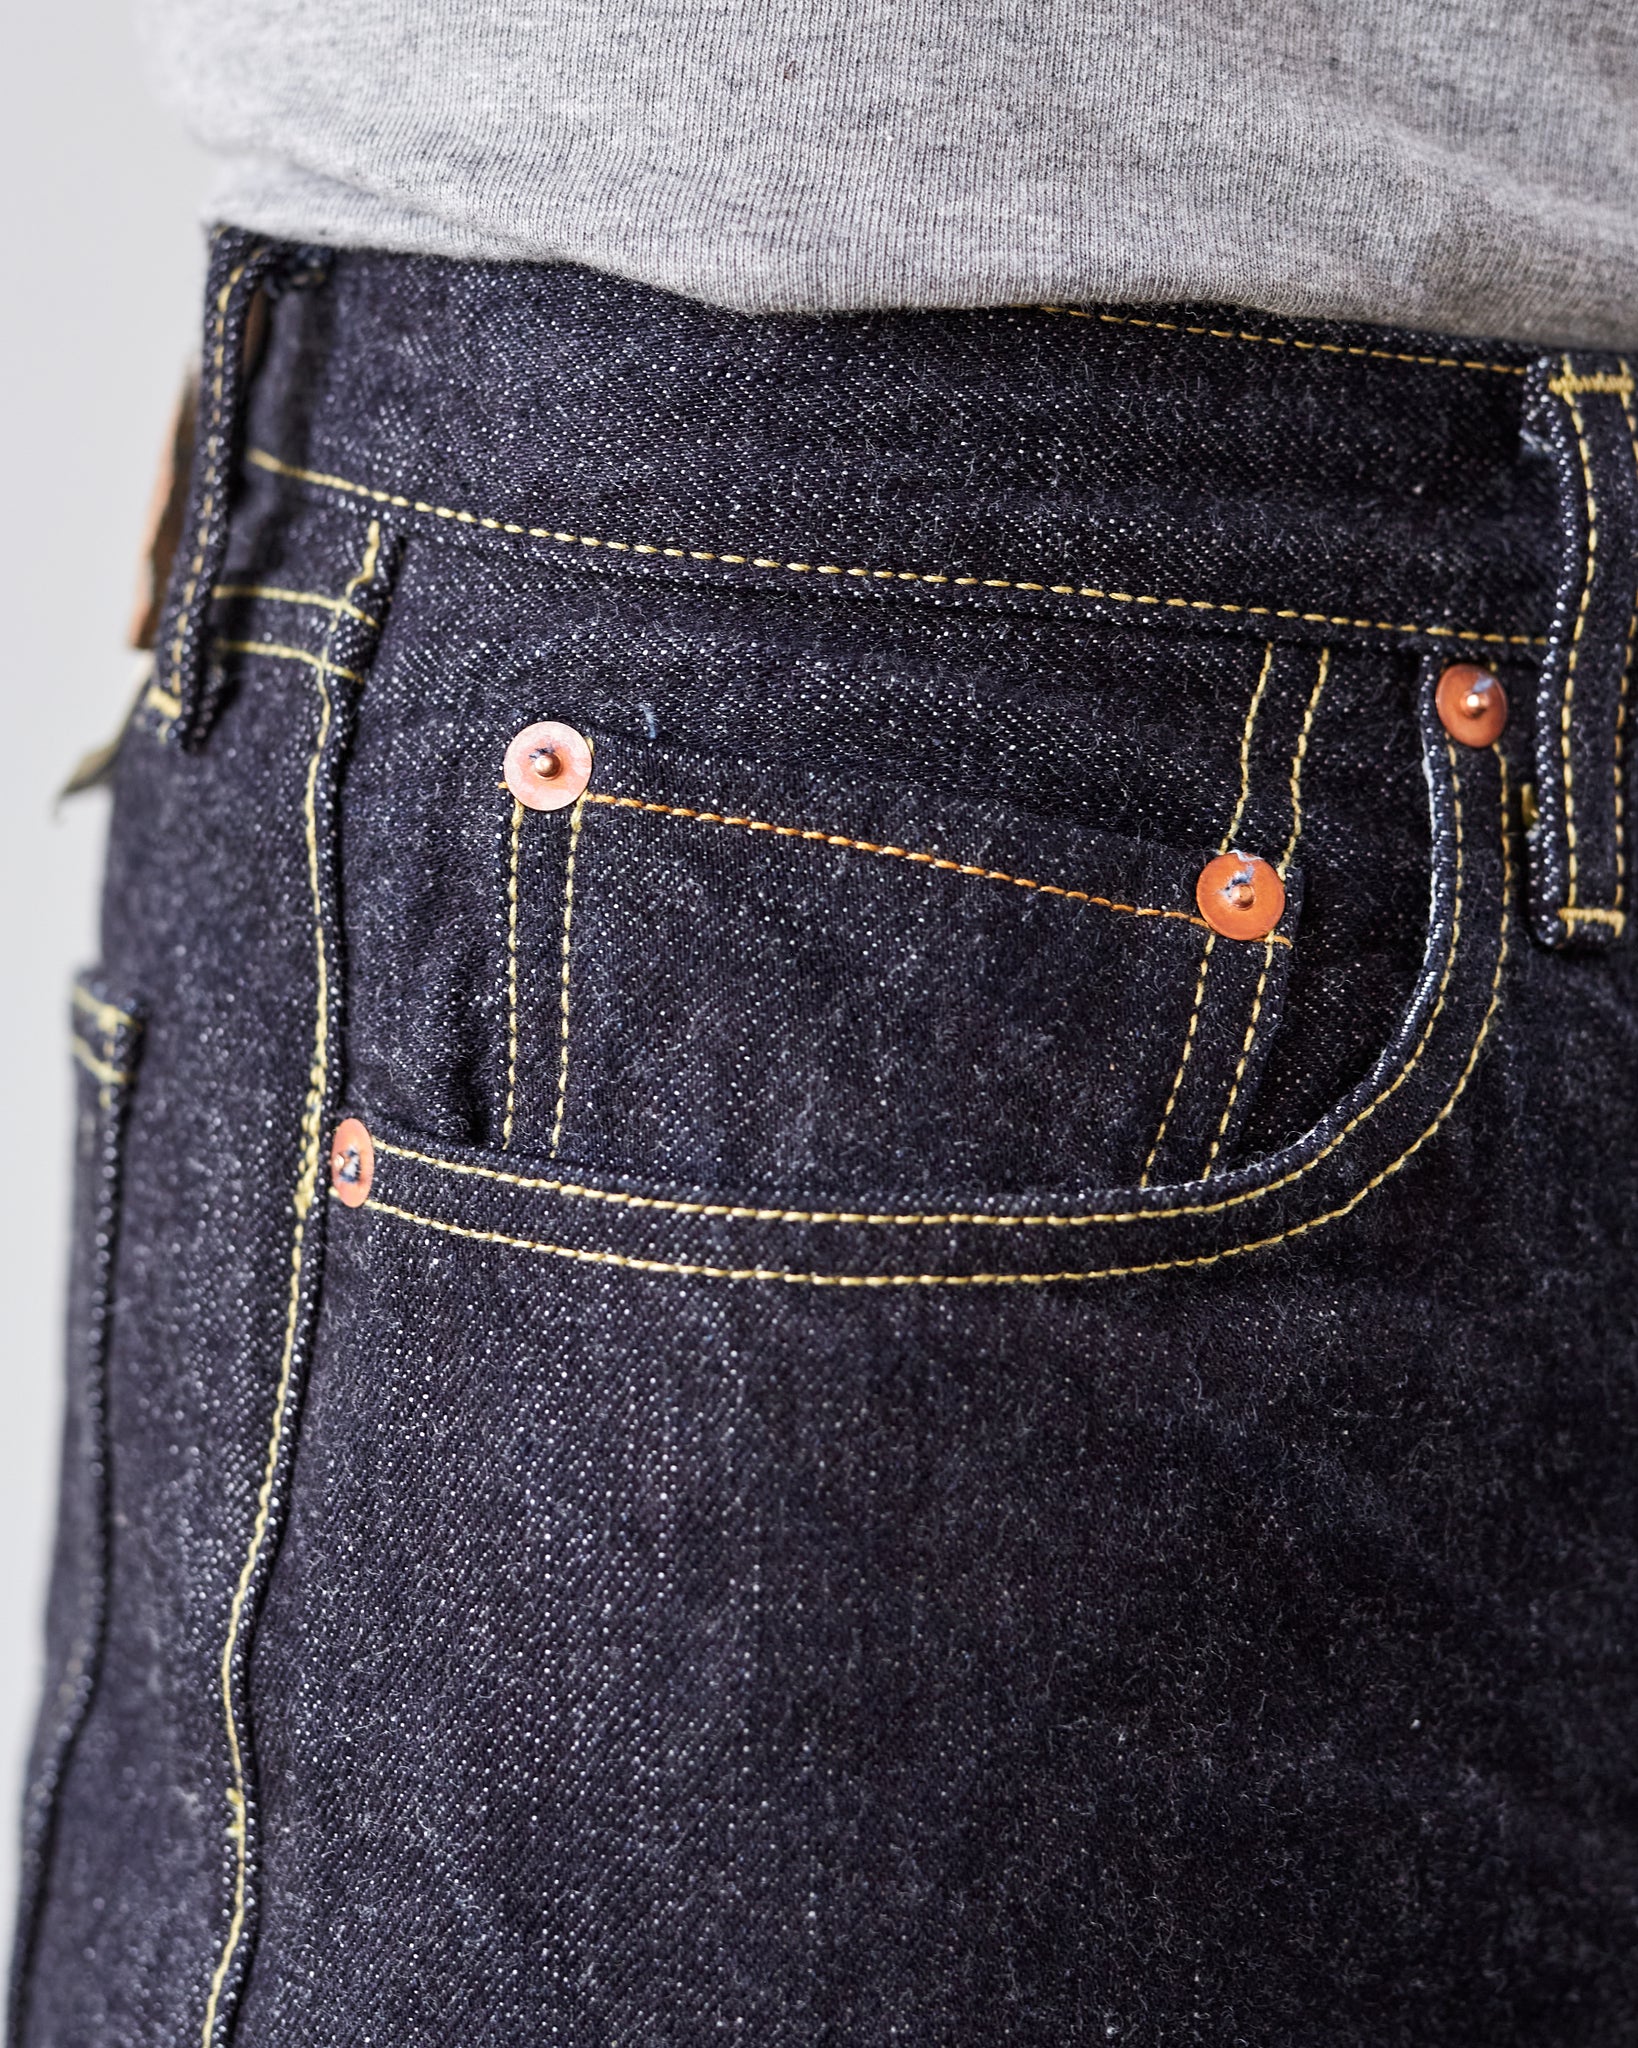 Monkey Wash Jeans at Best Price in New Delhi, Delhi | A & A Creations